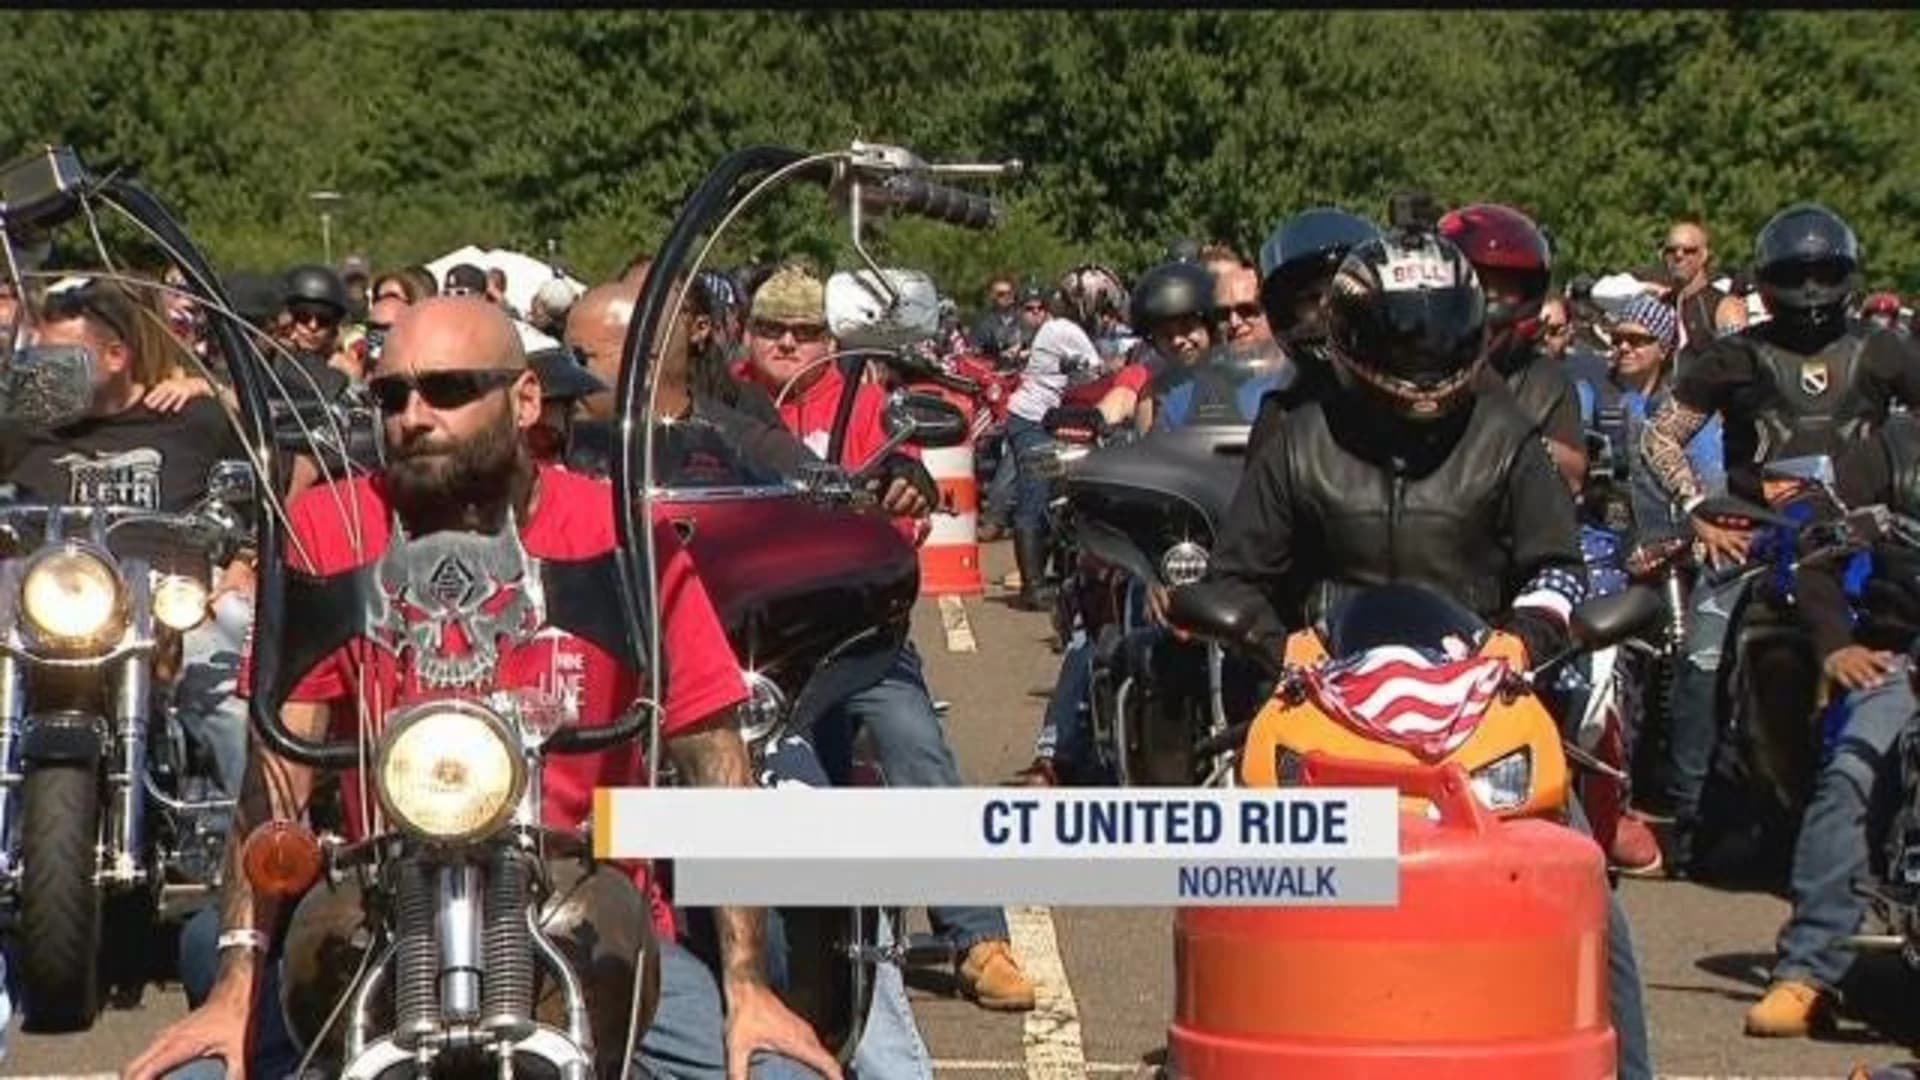 Thousands of spectators watch CT United Ride to honor 9/11 victims